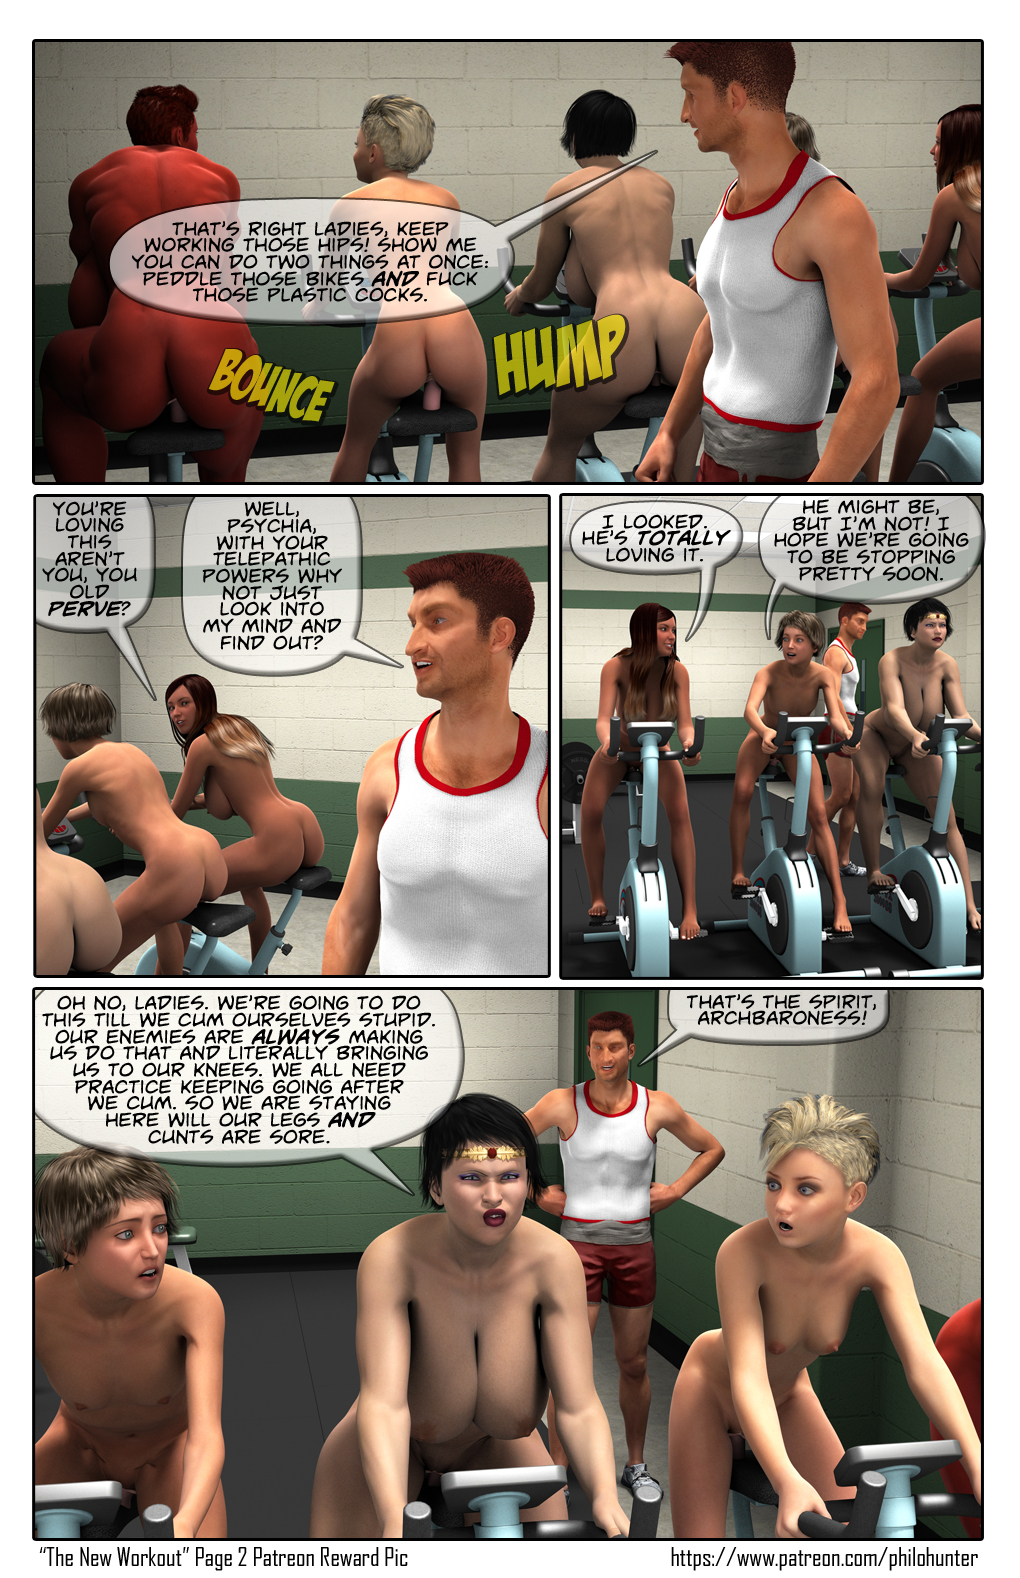 The New Workout Page 2.jpg